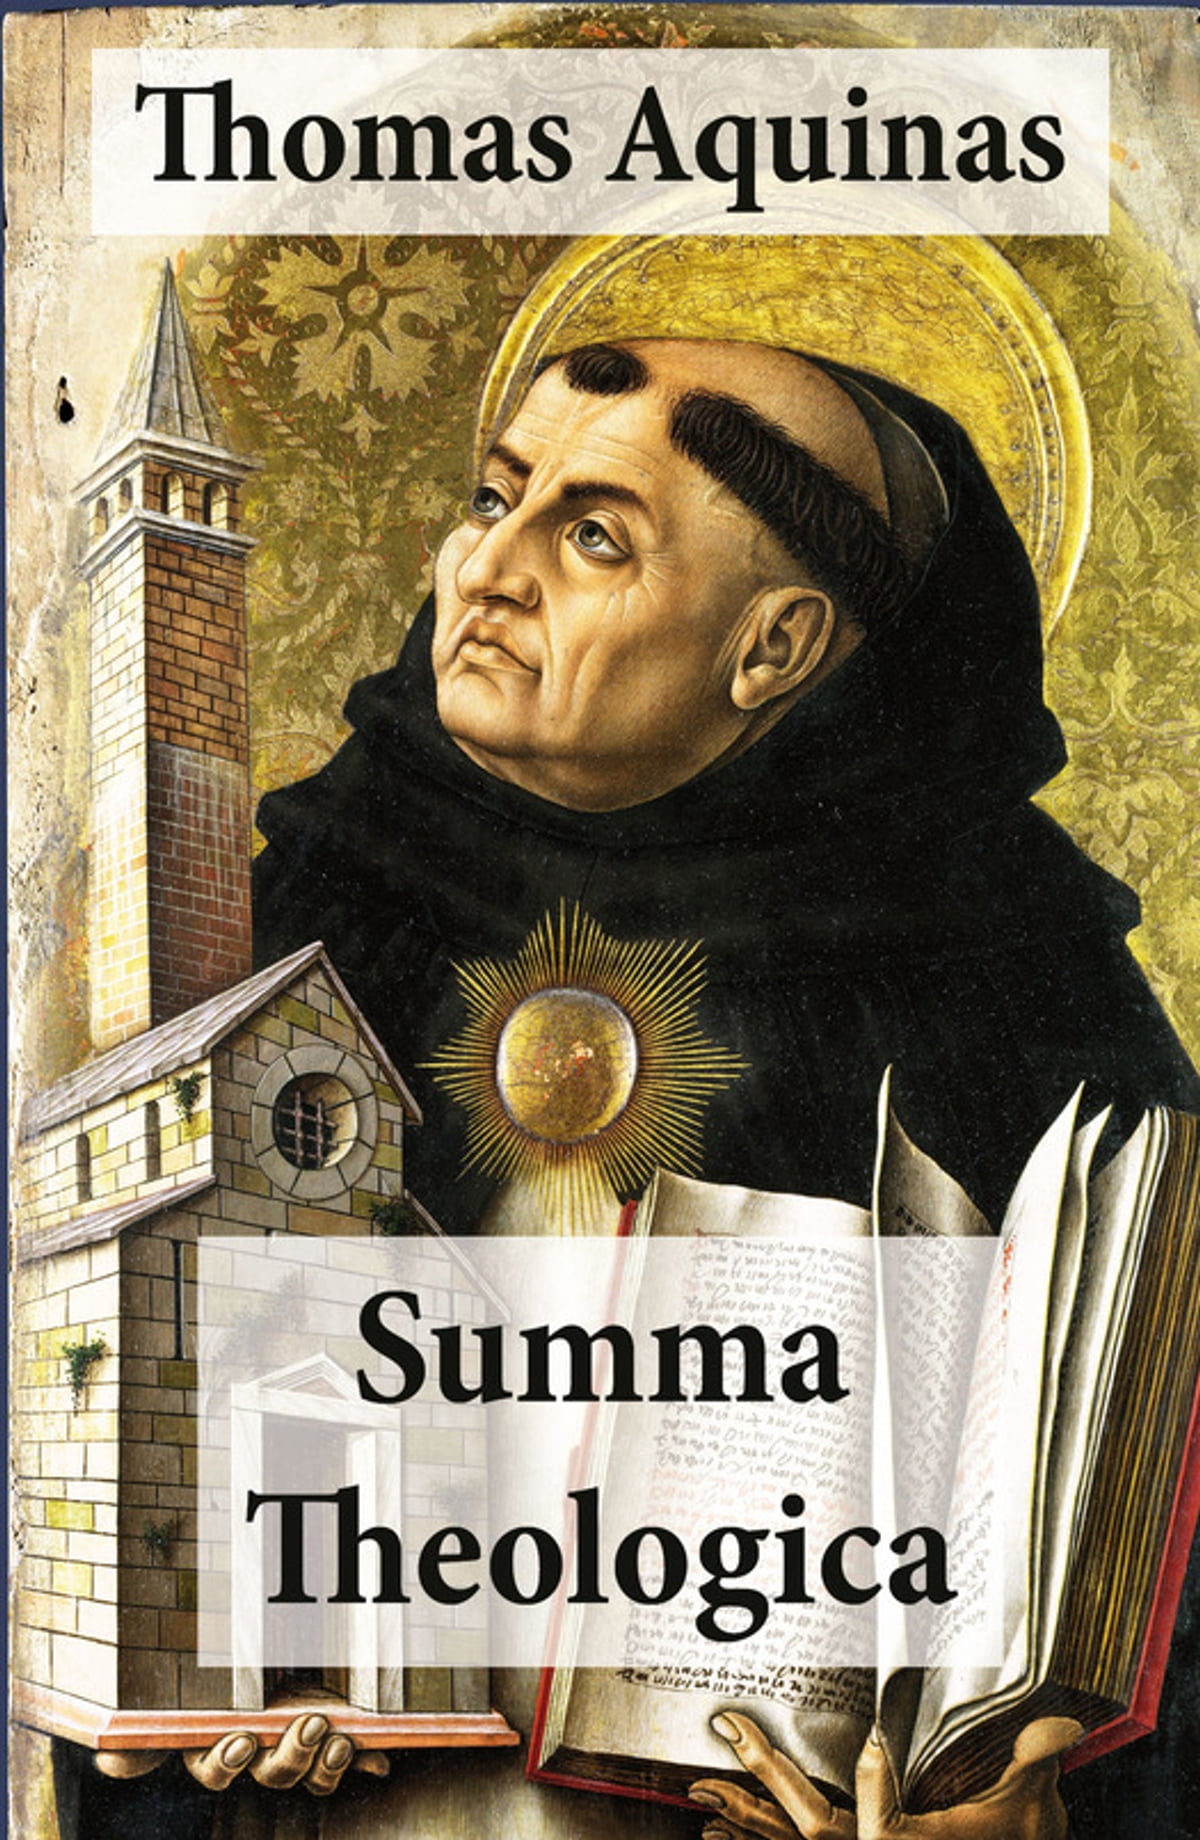 summa-theologica-all-complete-unabridged-3-parts-supplement-appendix-interactive-links-and-annotations